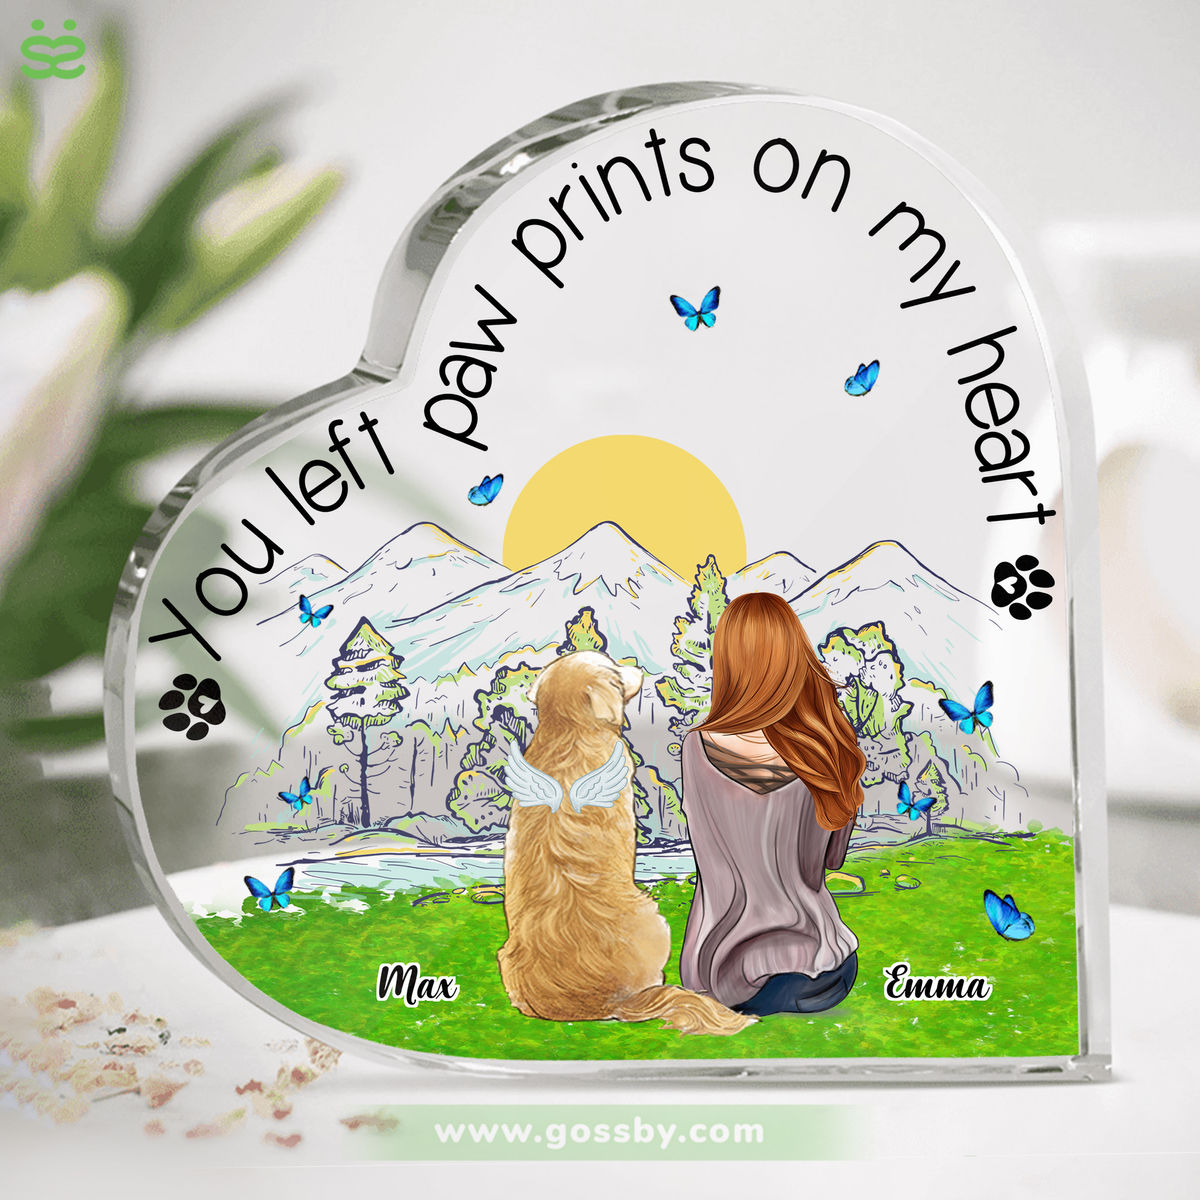 Heart Acrylic Transparent Plaque - Girl and Her Dog - Personalized Heart Shaped Acrylic Plaque - The Moment Your Heart Stopped Mine Changed Forever_1